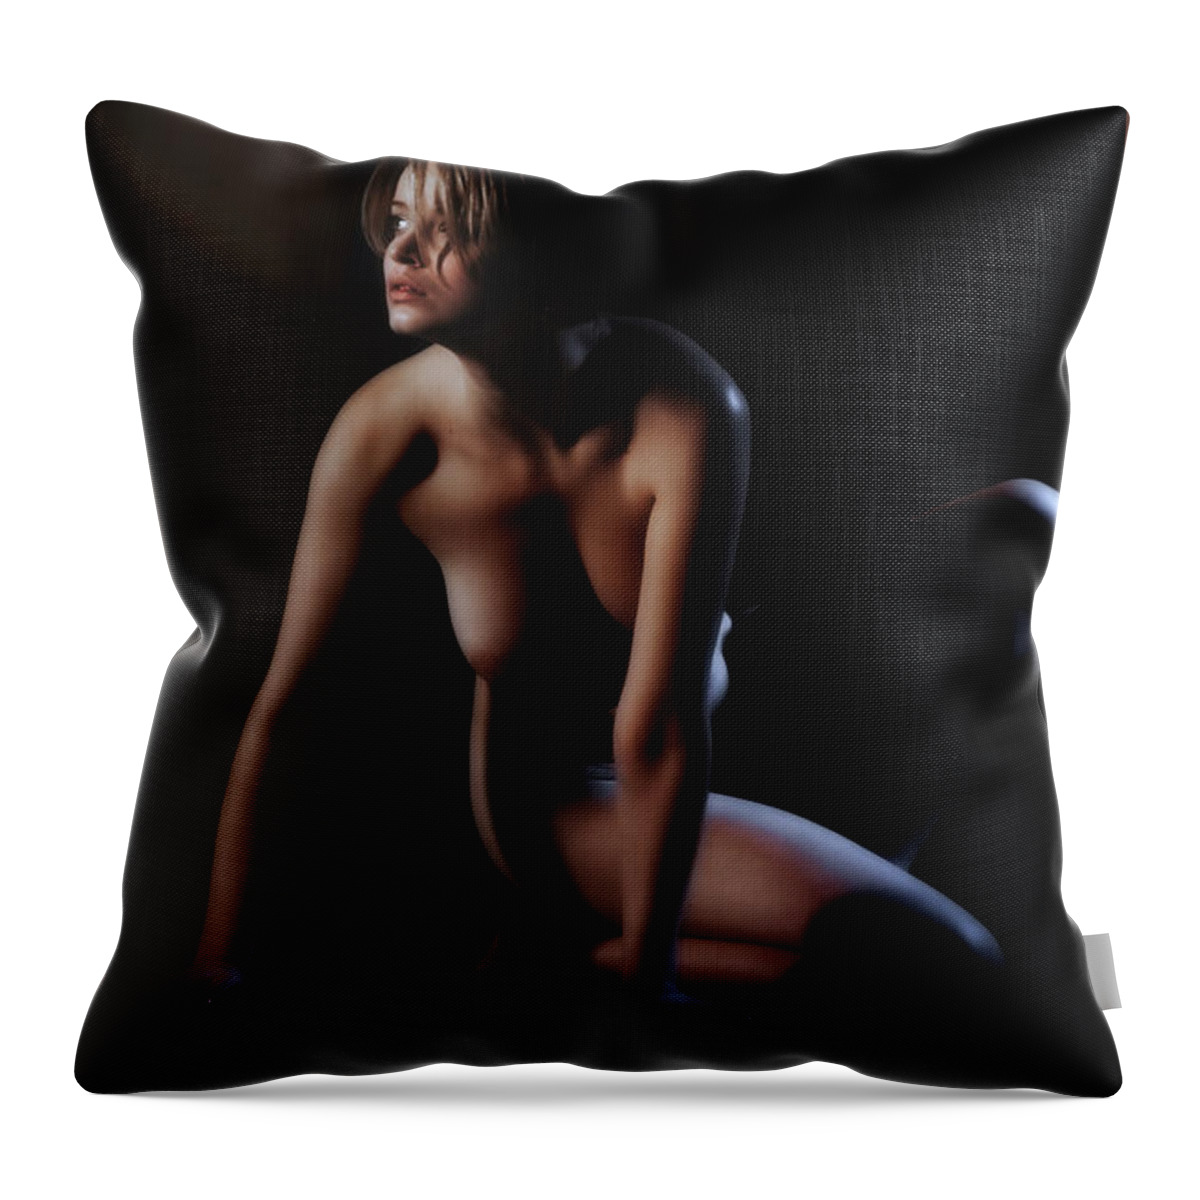 Woman Throw Pillow featuring the photograph Turning to the Light by Vitaly Vakhrushev